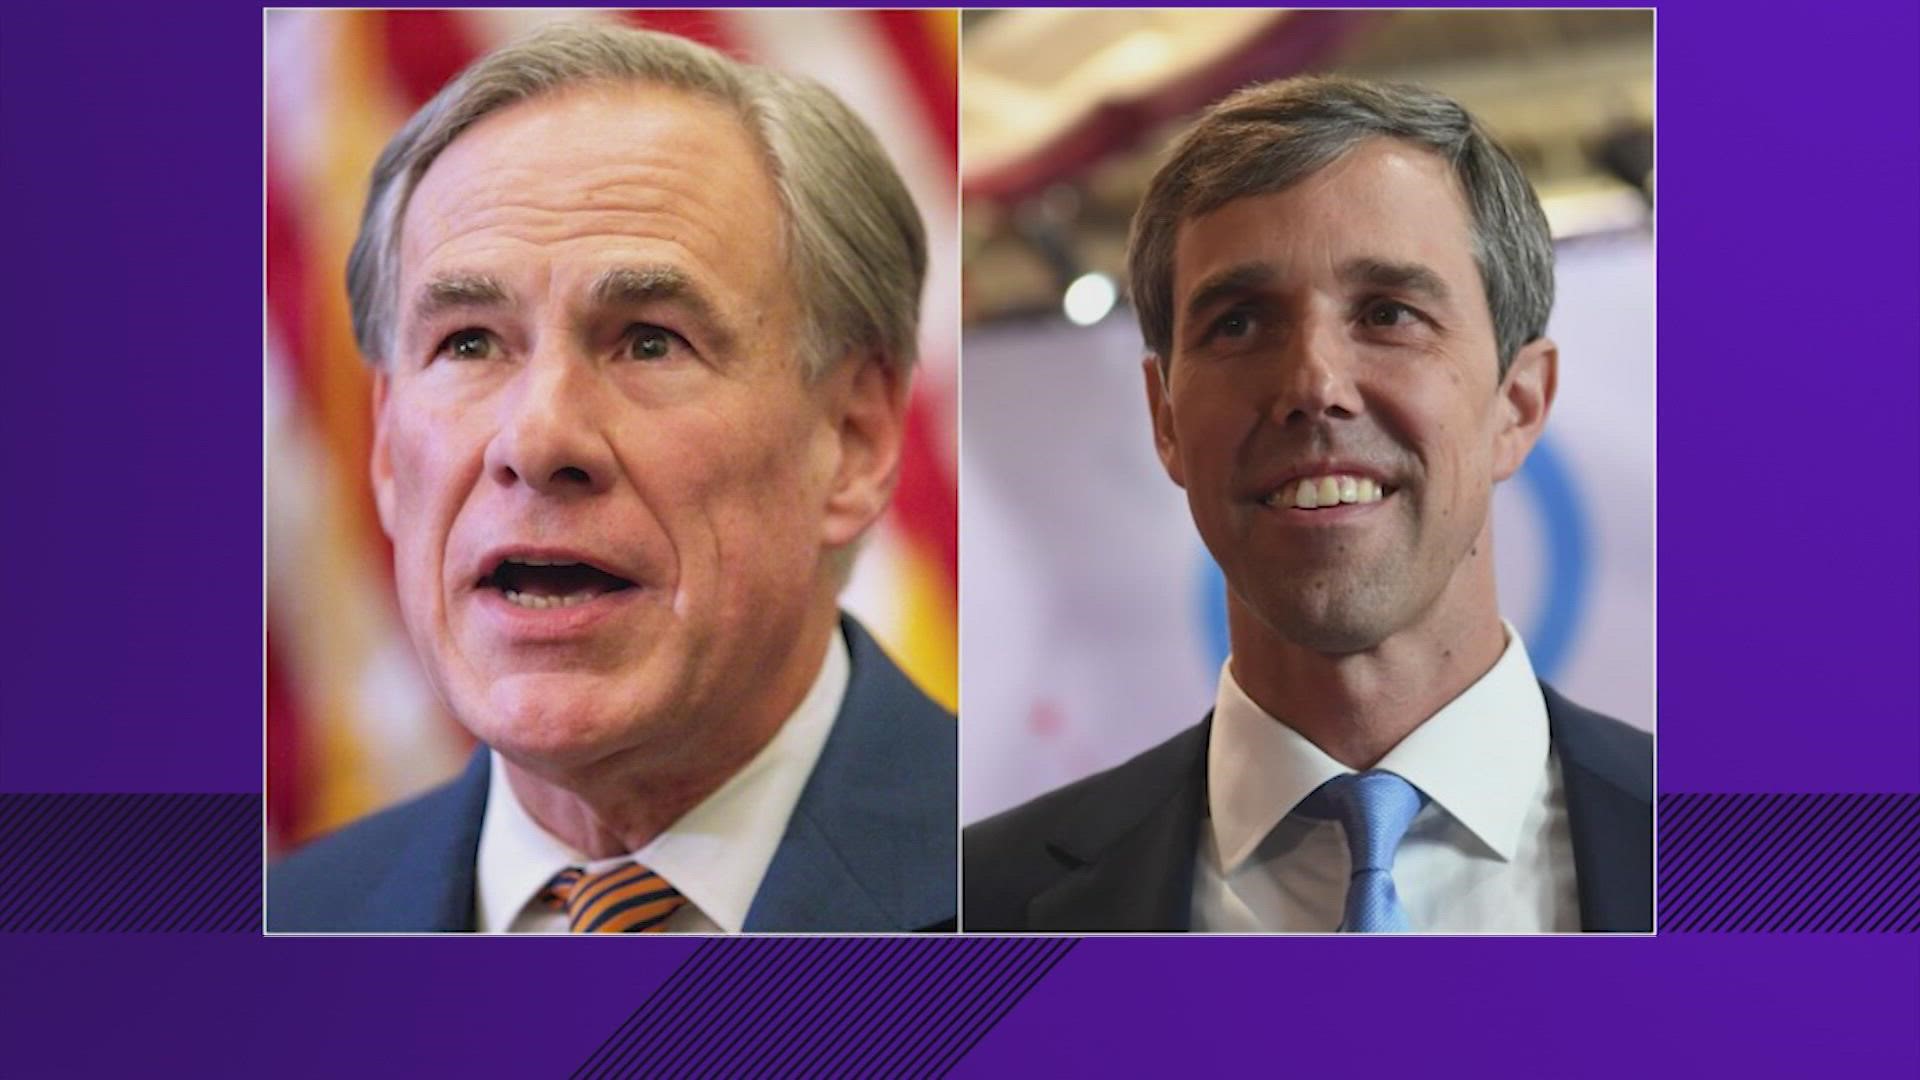 Republican Greg Abbott and Democrat Beto O'Rourke both made stops in Houston along their campaign trails on Tuesday.